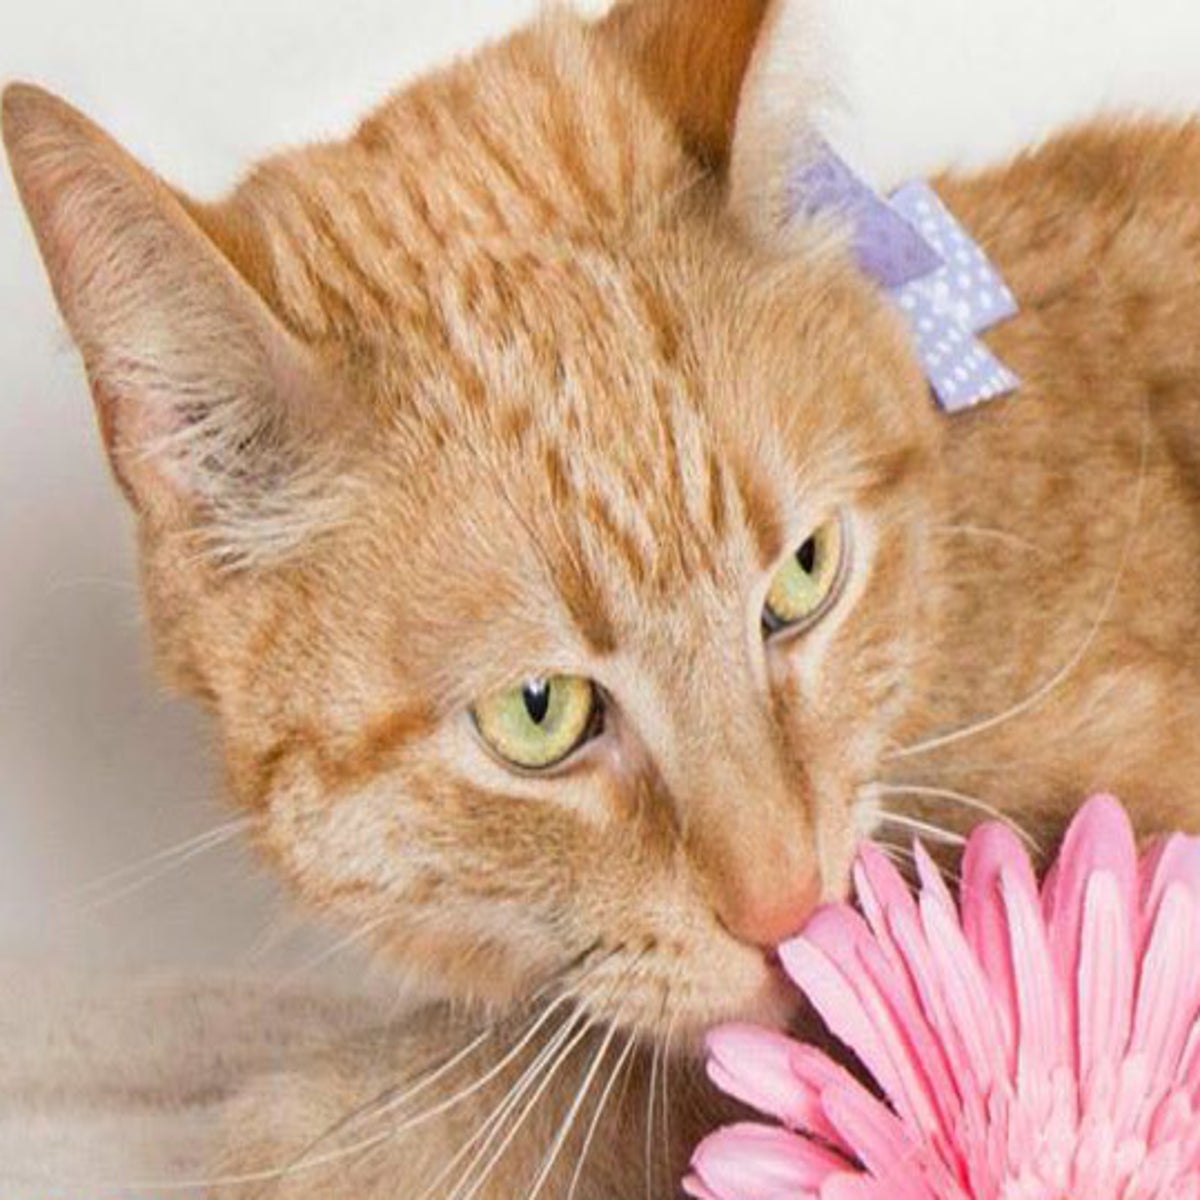 Heartbroken cat spends YEAR living by dead owner's grave - World